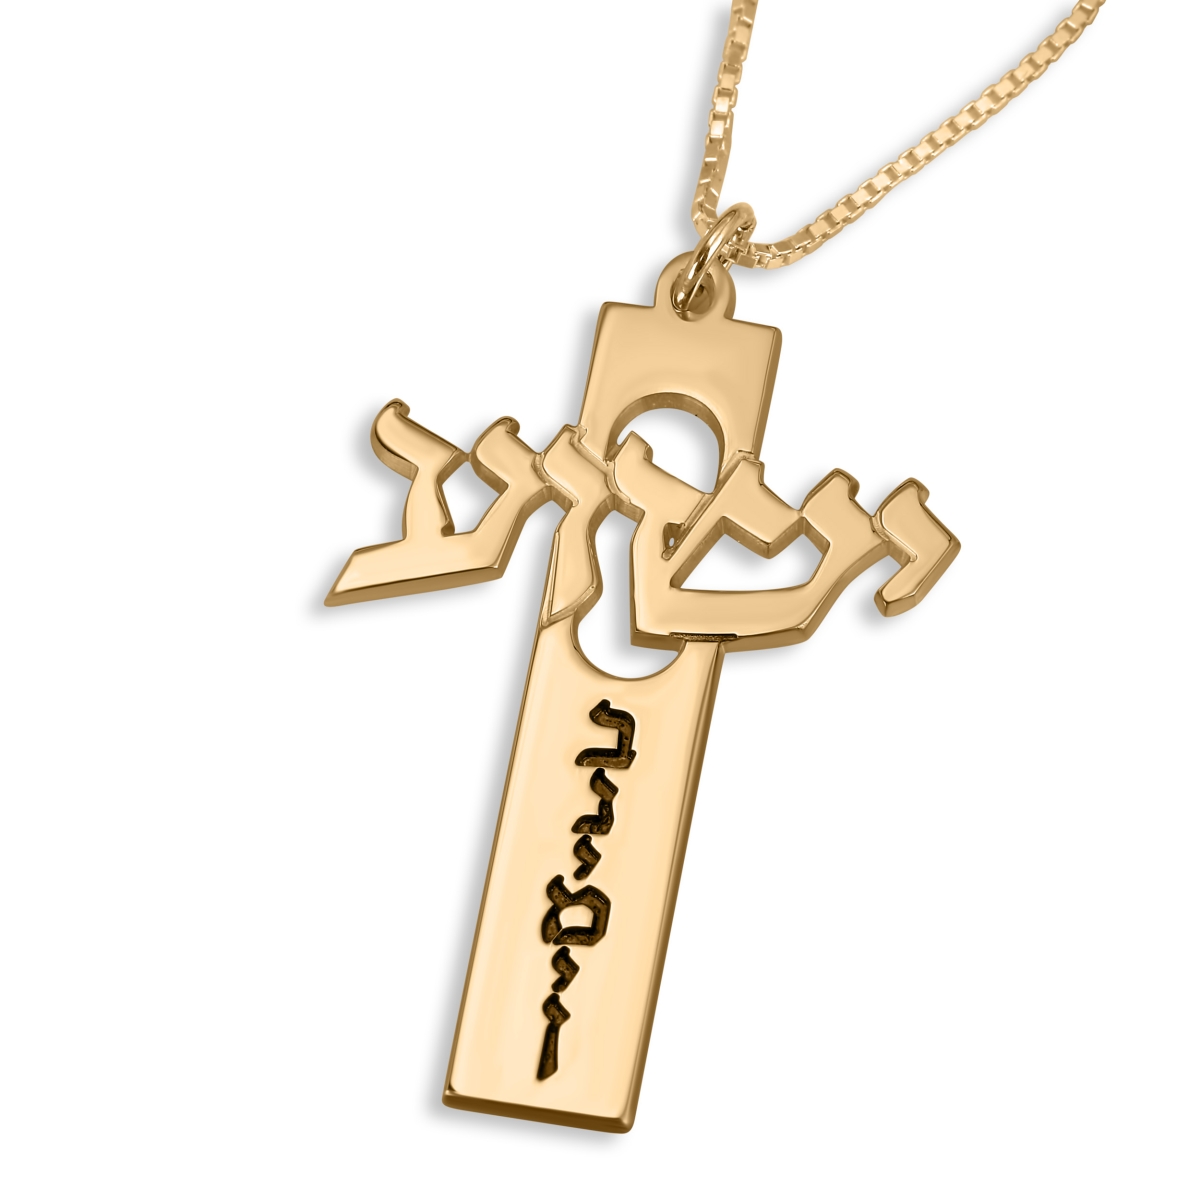 24K Gold Plated  Jesus “Yeshua” Cross Personalized Hebrew Name Necklace - 1